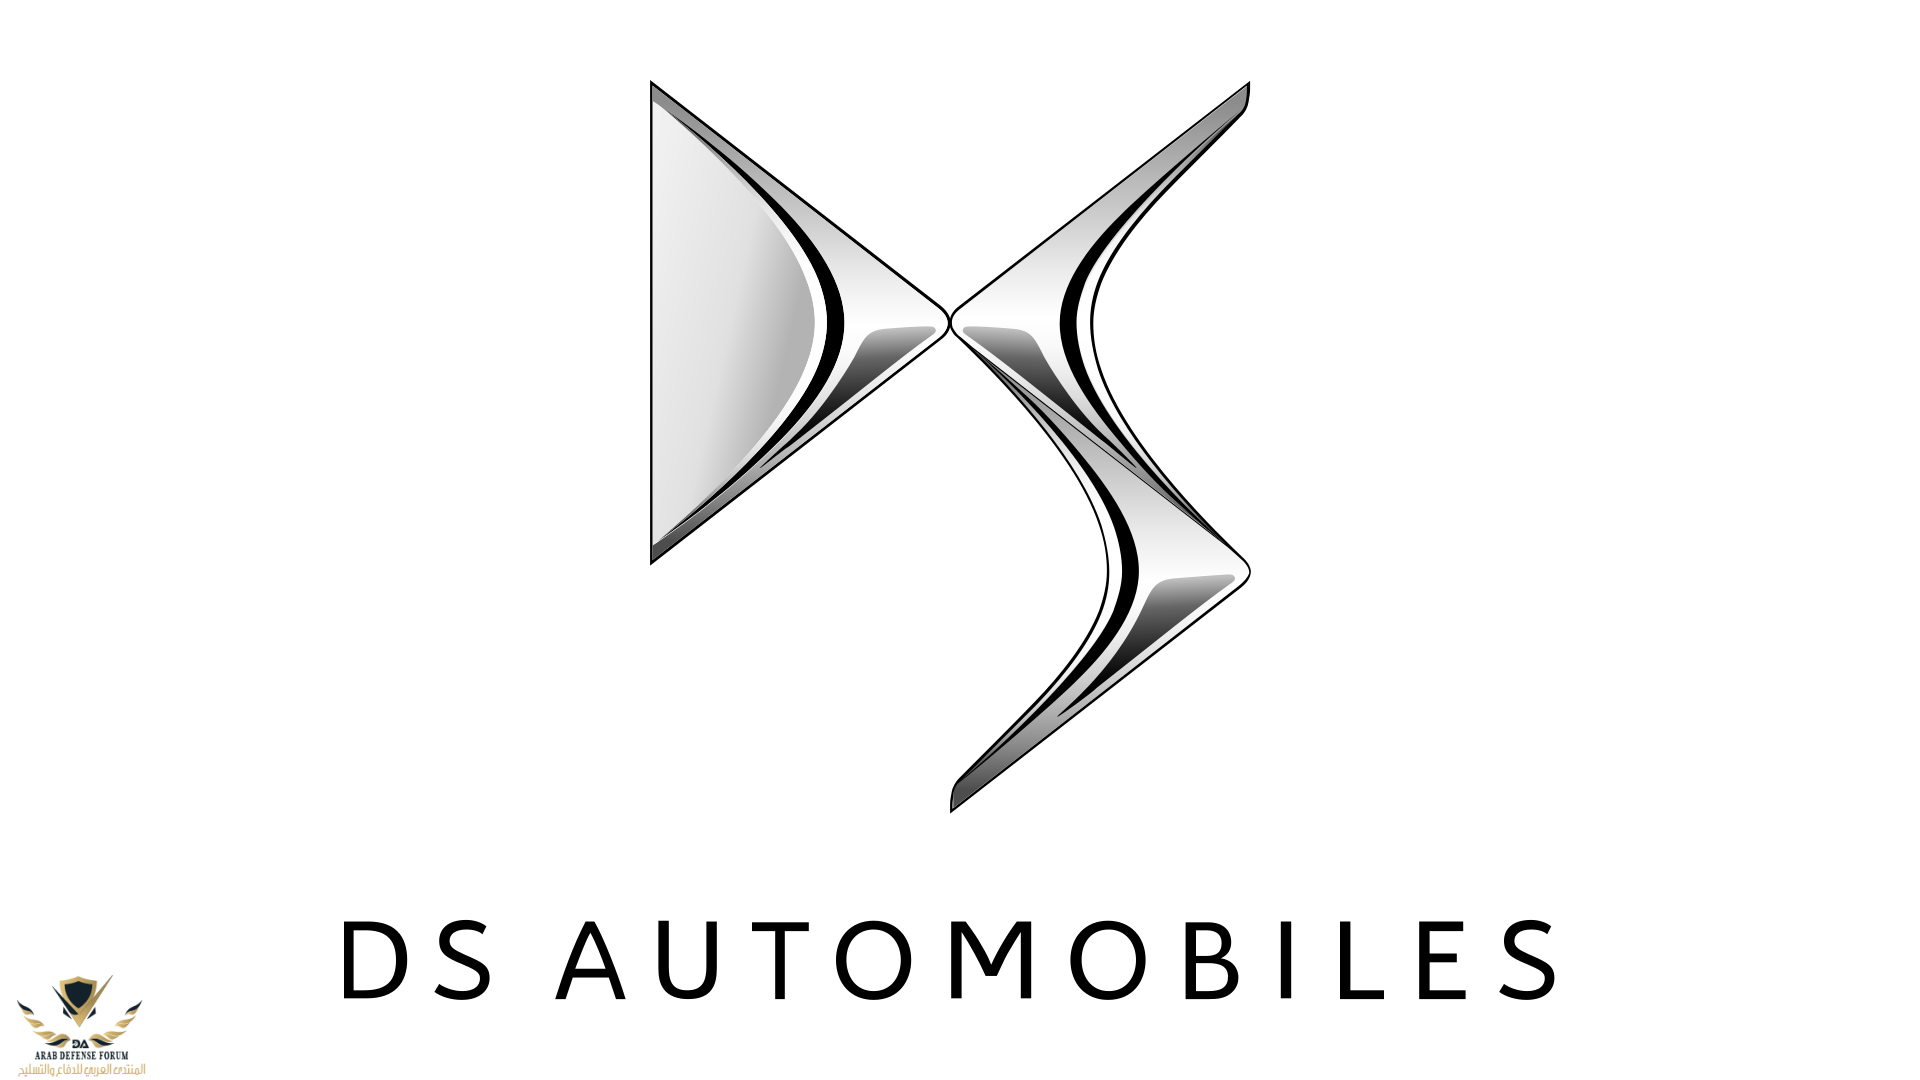 DS-logo-2009-1920x1080.png